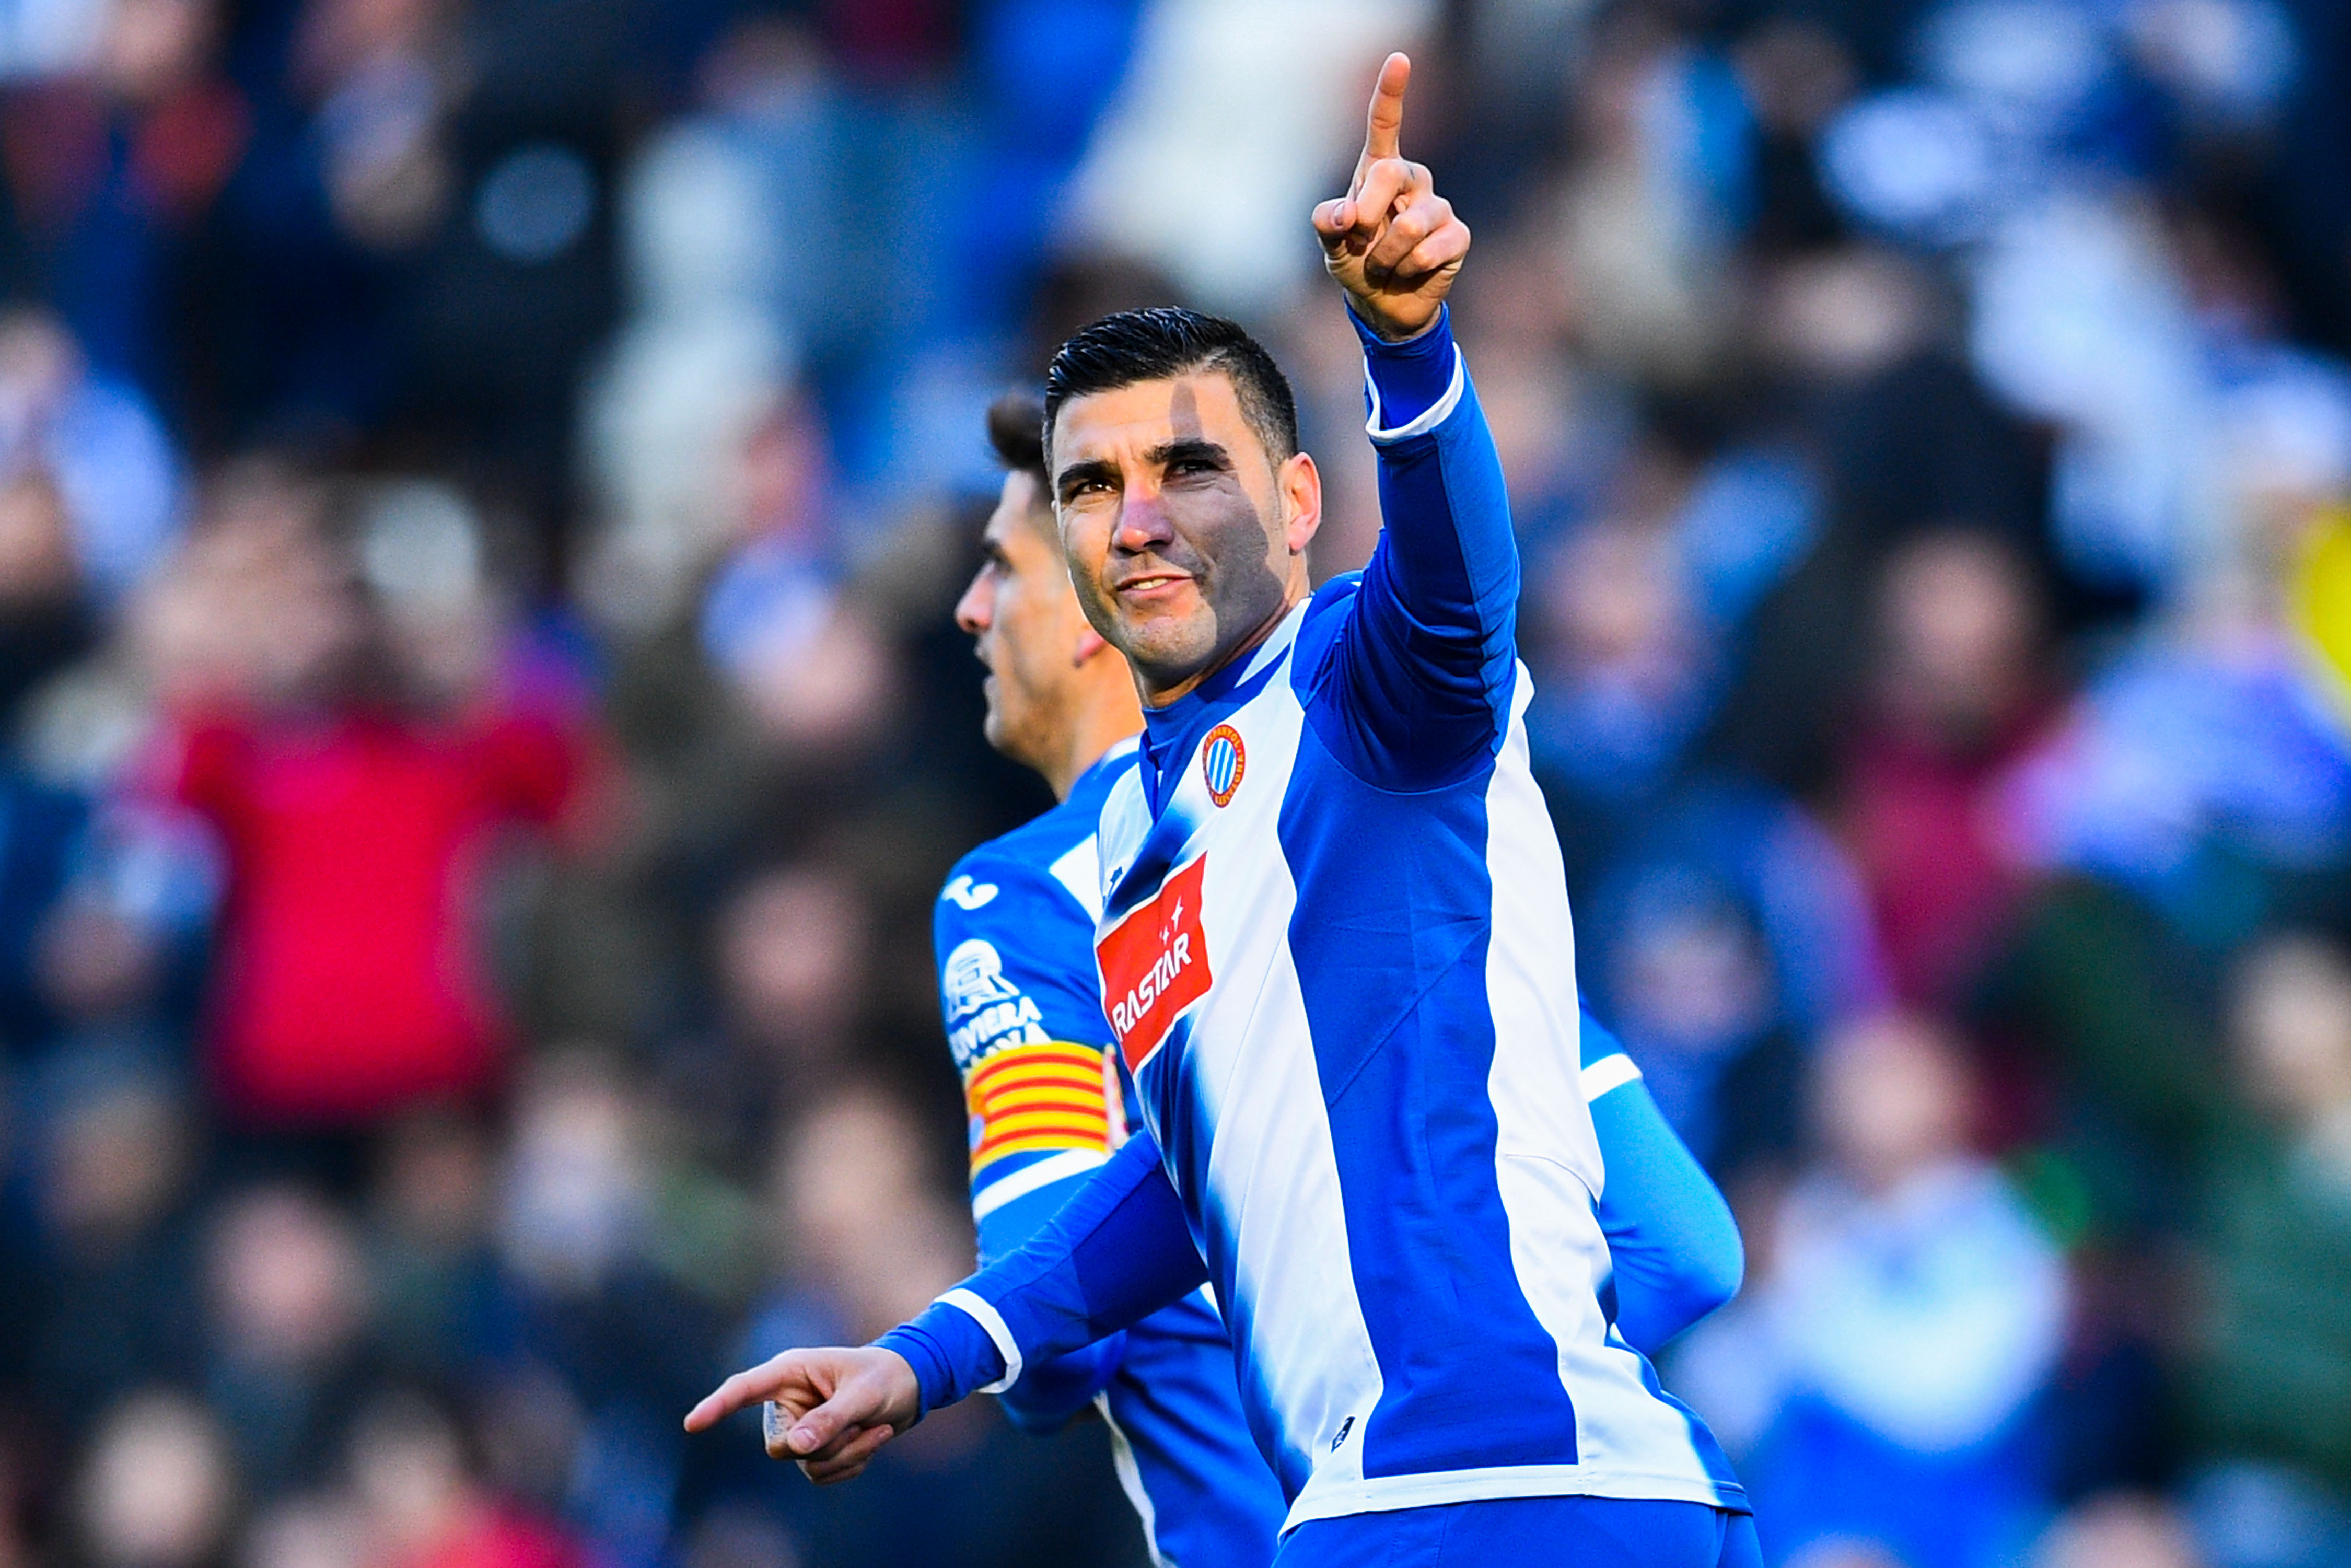 BARCELONA, SPAIN - JANUARY 29:  Jose Antonio Reyes of RCD Espanyol celebrates after scoring his team's first goal from the penalty spot during the La Liga match between RCD Espanyol and Sevilla FC at Cornella-El Prat stadium on January 29, 2017 in Barcelona, Spain.  (Photo by David Ramos/Getty Images)